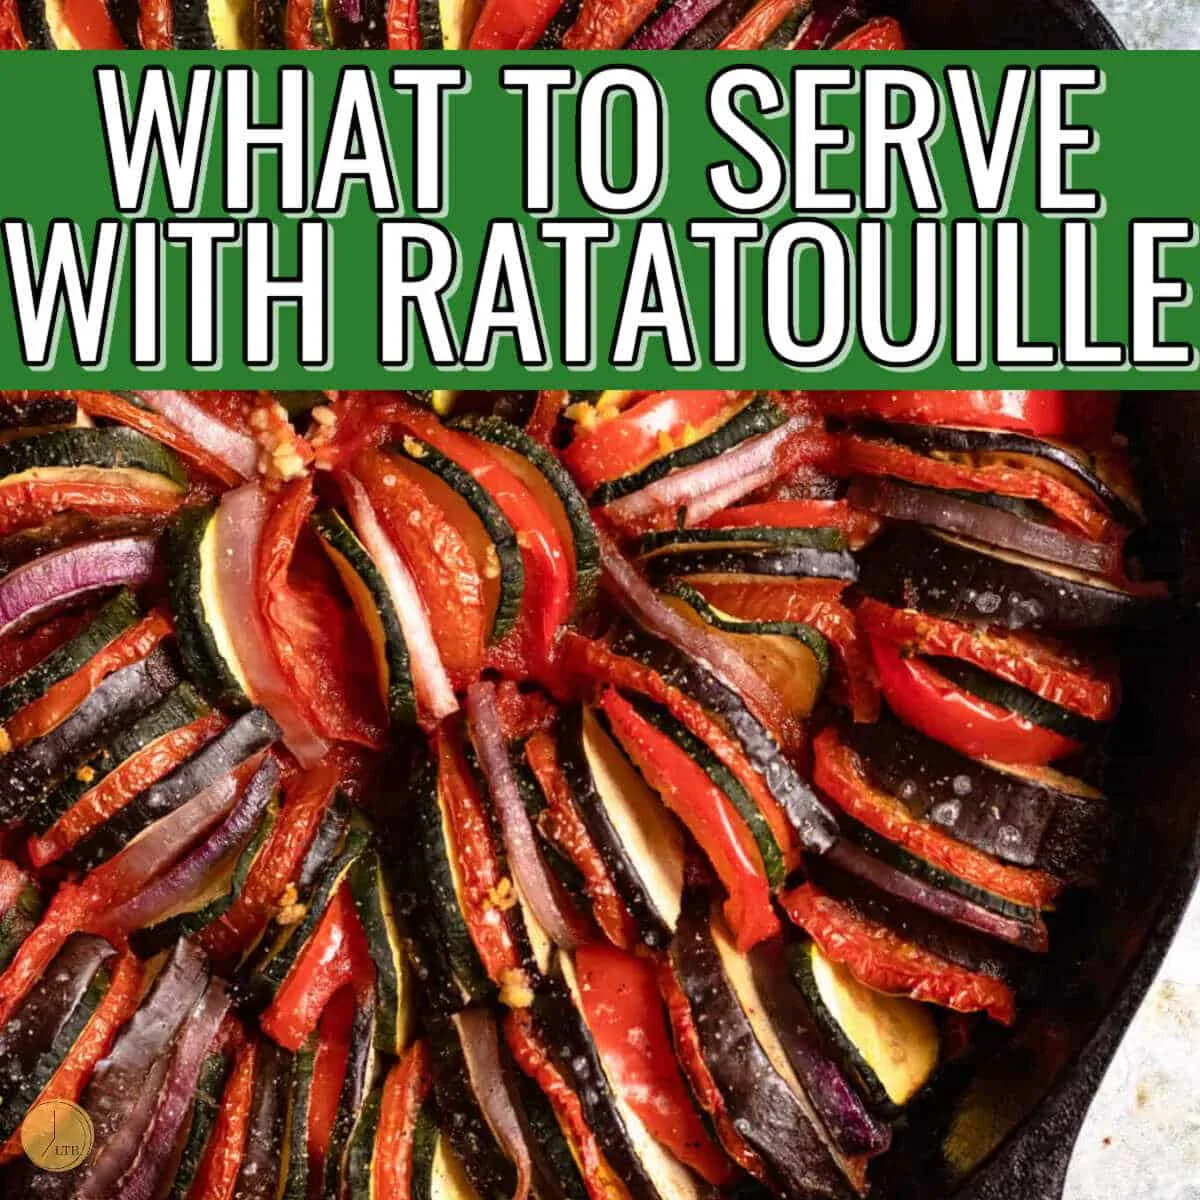 pan of ratatouille with text "what to serve with ratatouille"